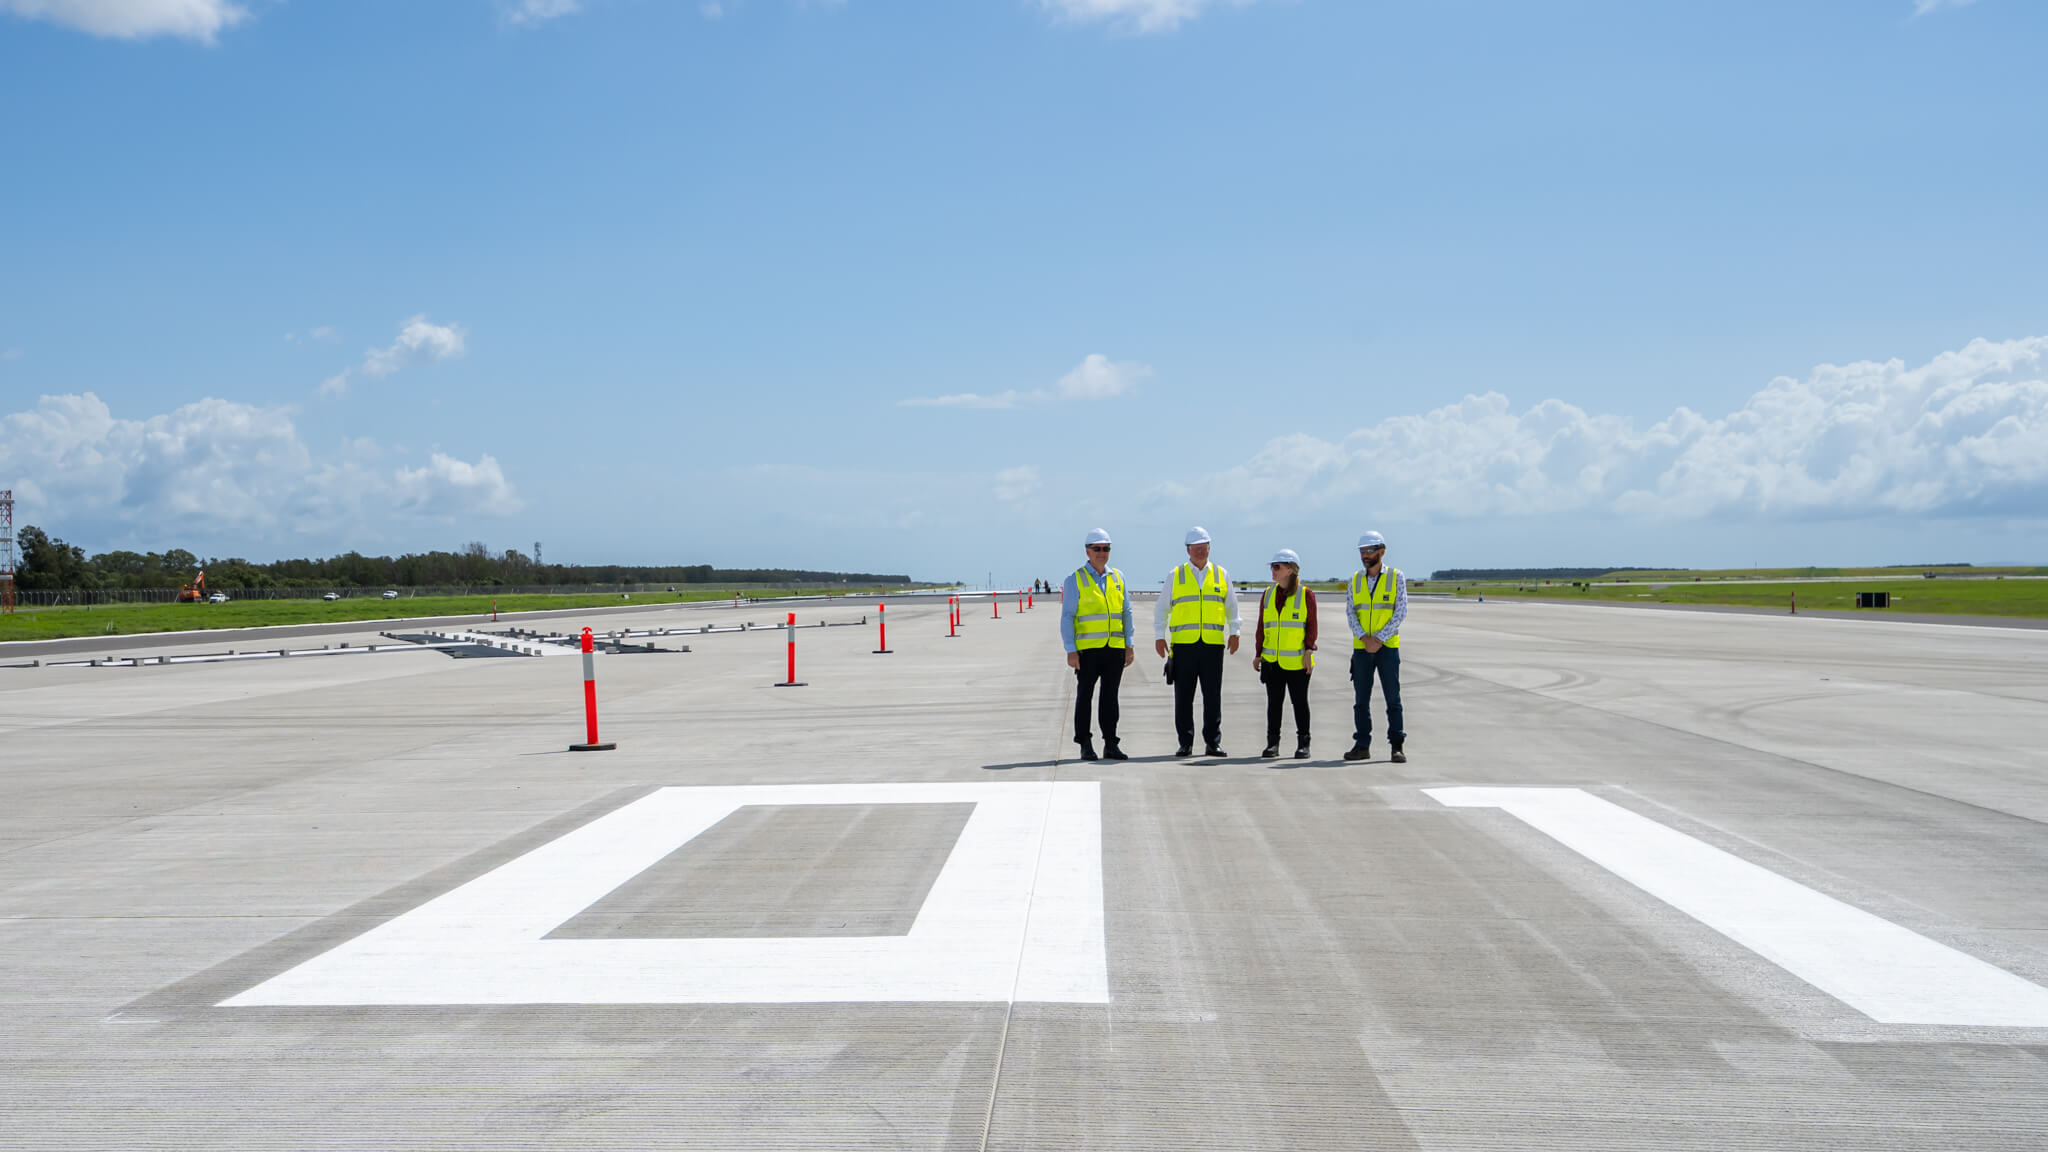 a group of men wearing safety vests and helmets standing on a runway